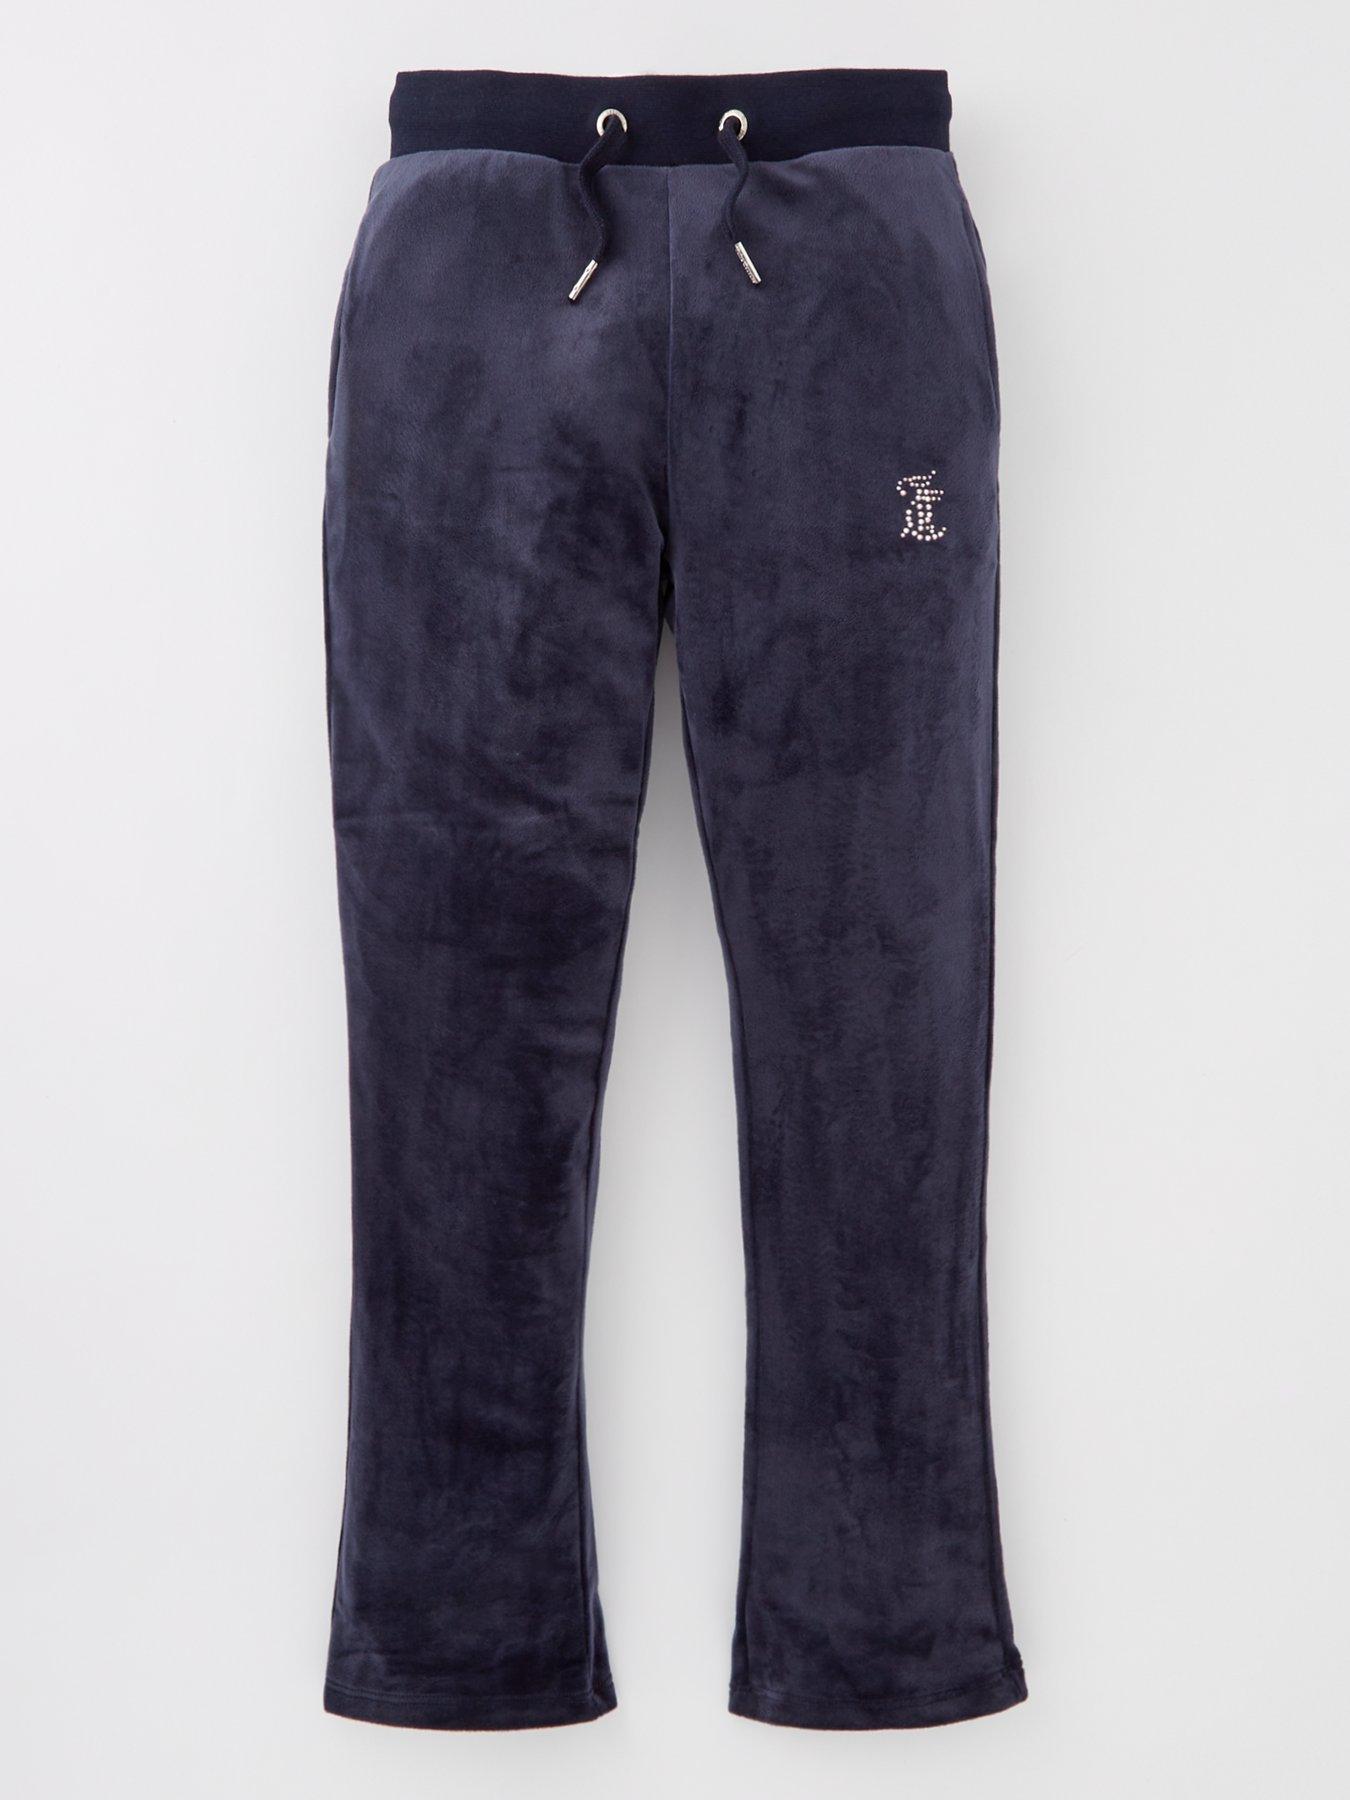 Black peach skin joggers with two silver stripes on the sides